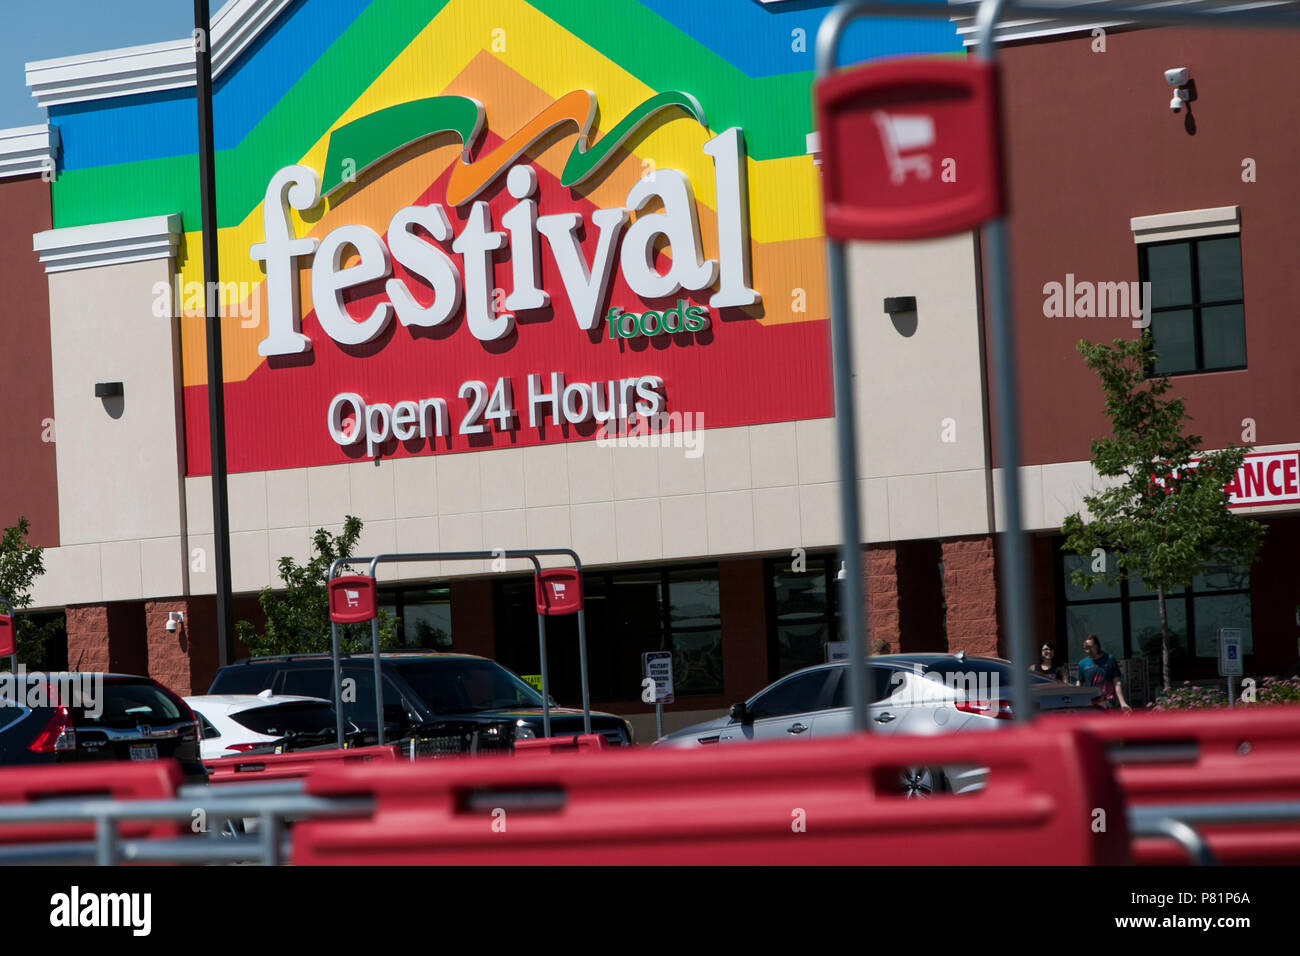 A logo sign outside of a Festival Foods retail grocery store in Kenosha